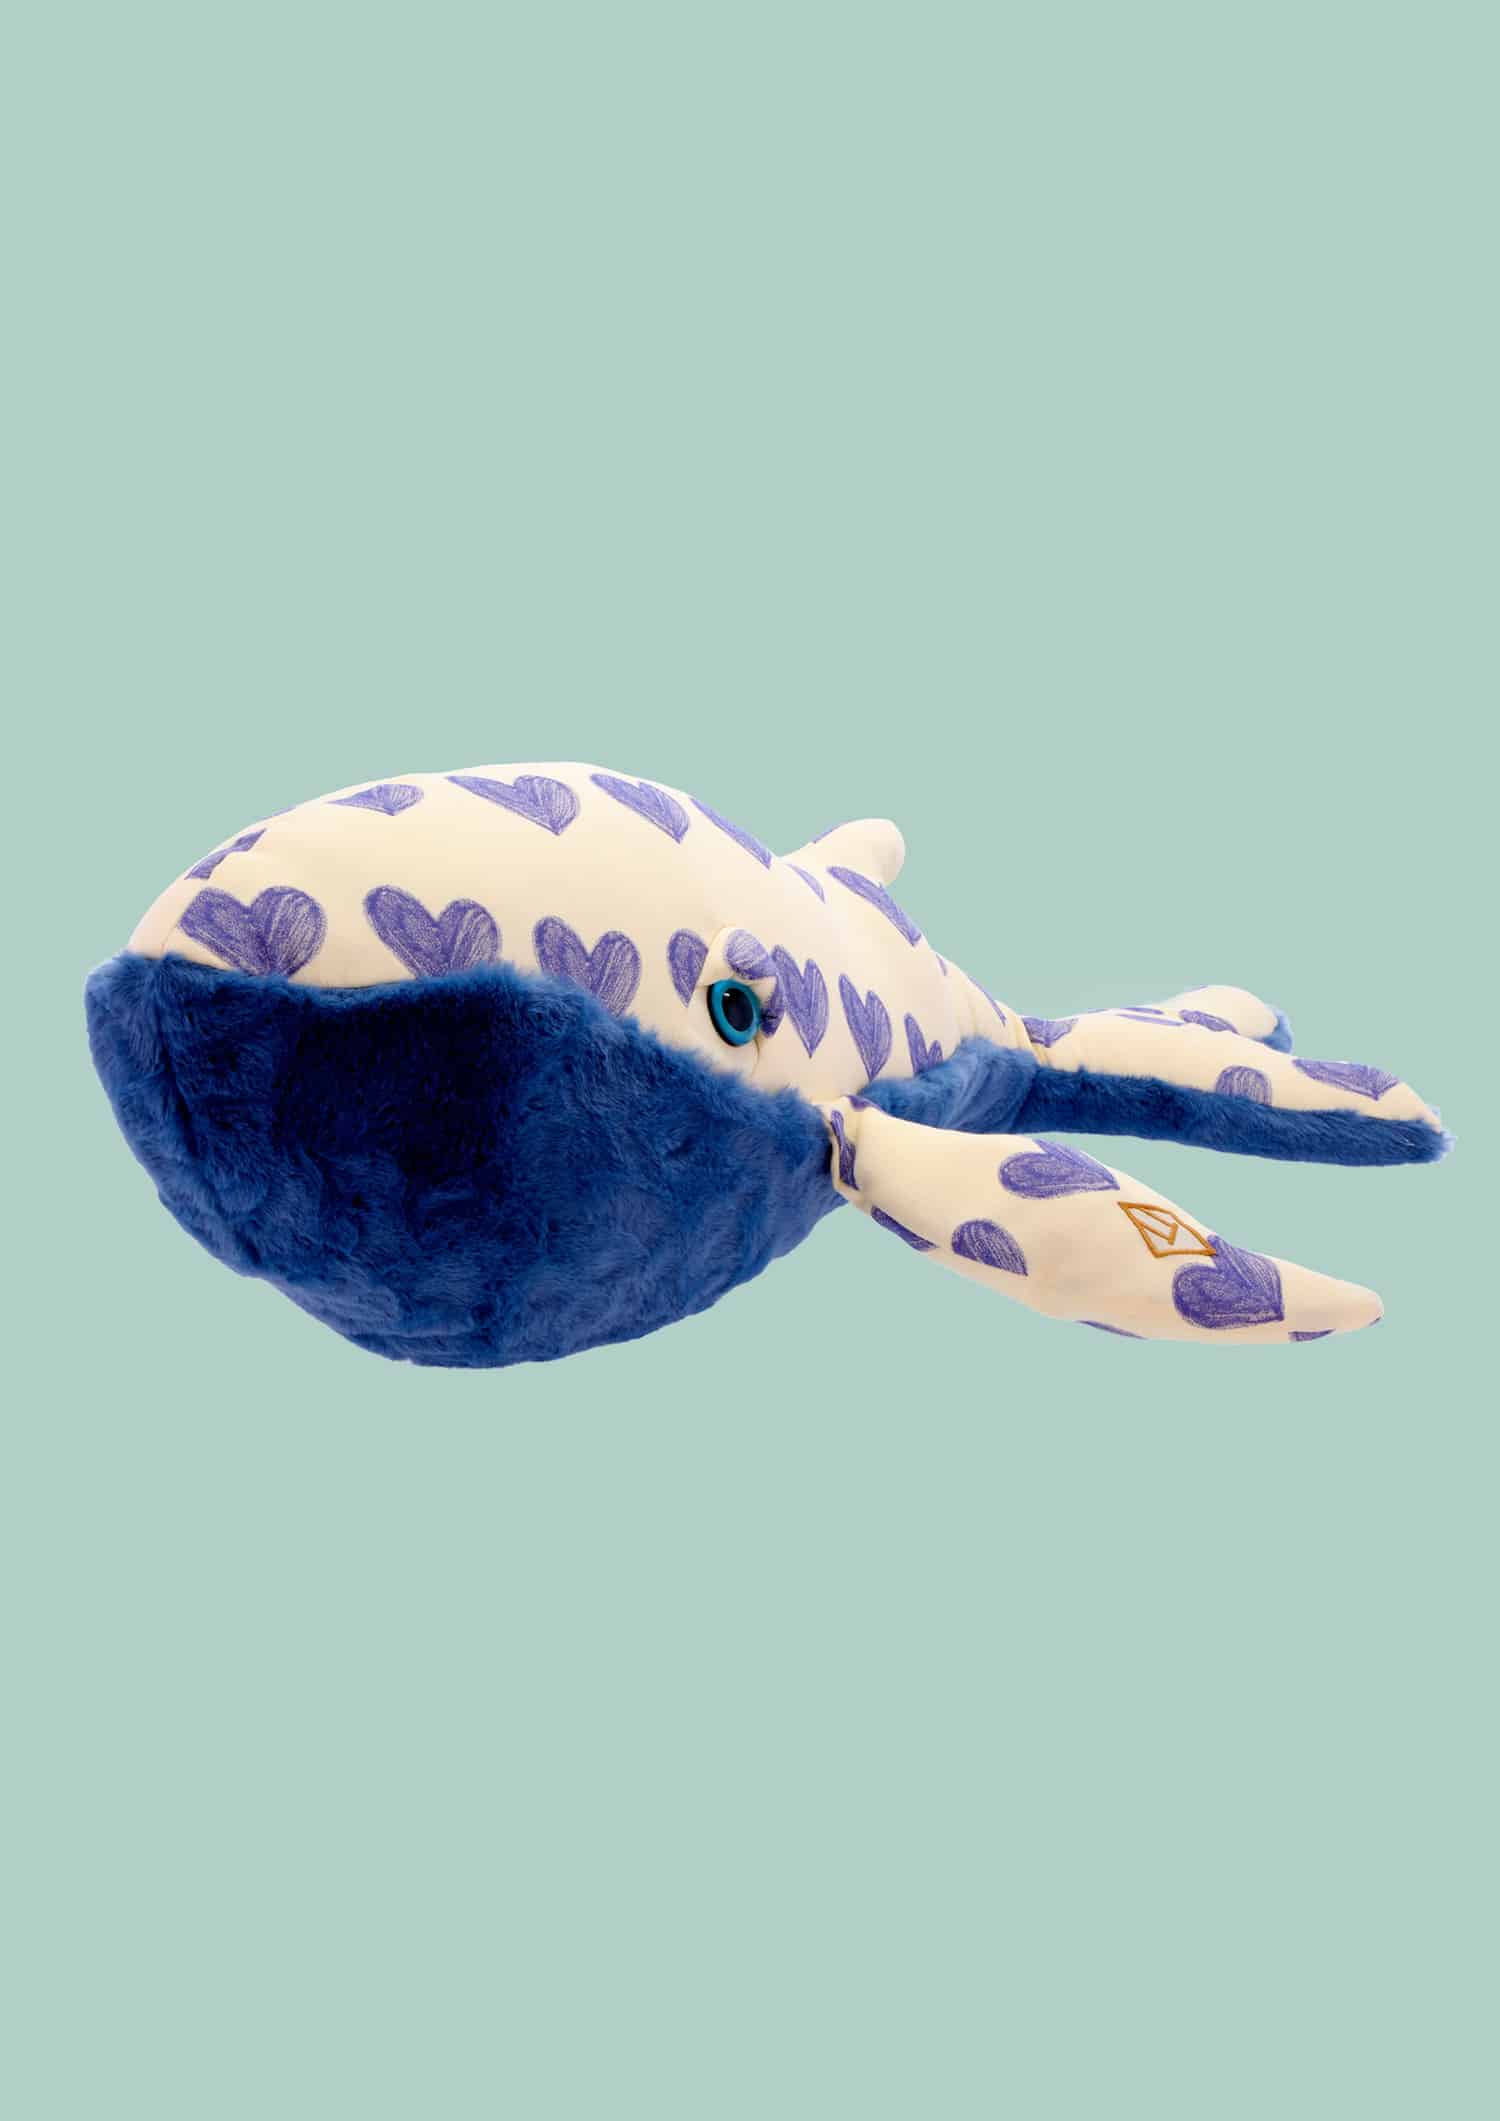 Big Heart Whale, the Animals Observatory x BigStuffed collaboration 